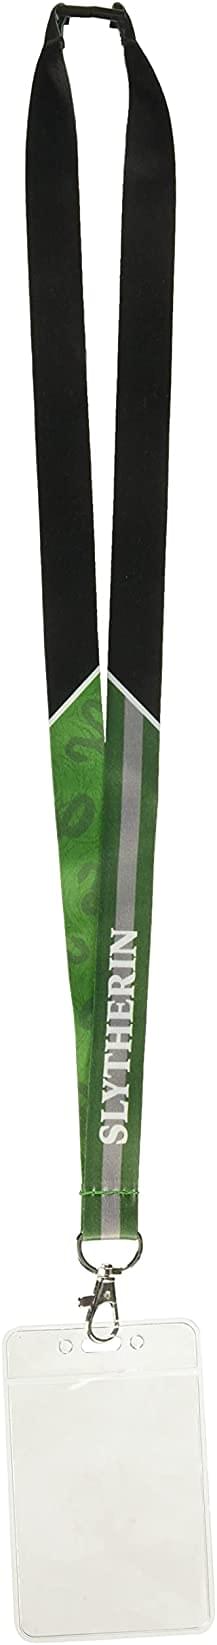 Harry Potter House Slytherin Lanyard With Breakaway Strap